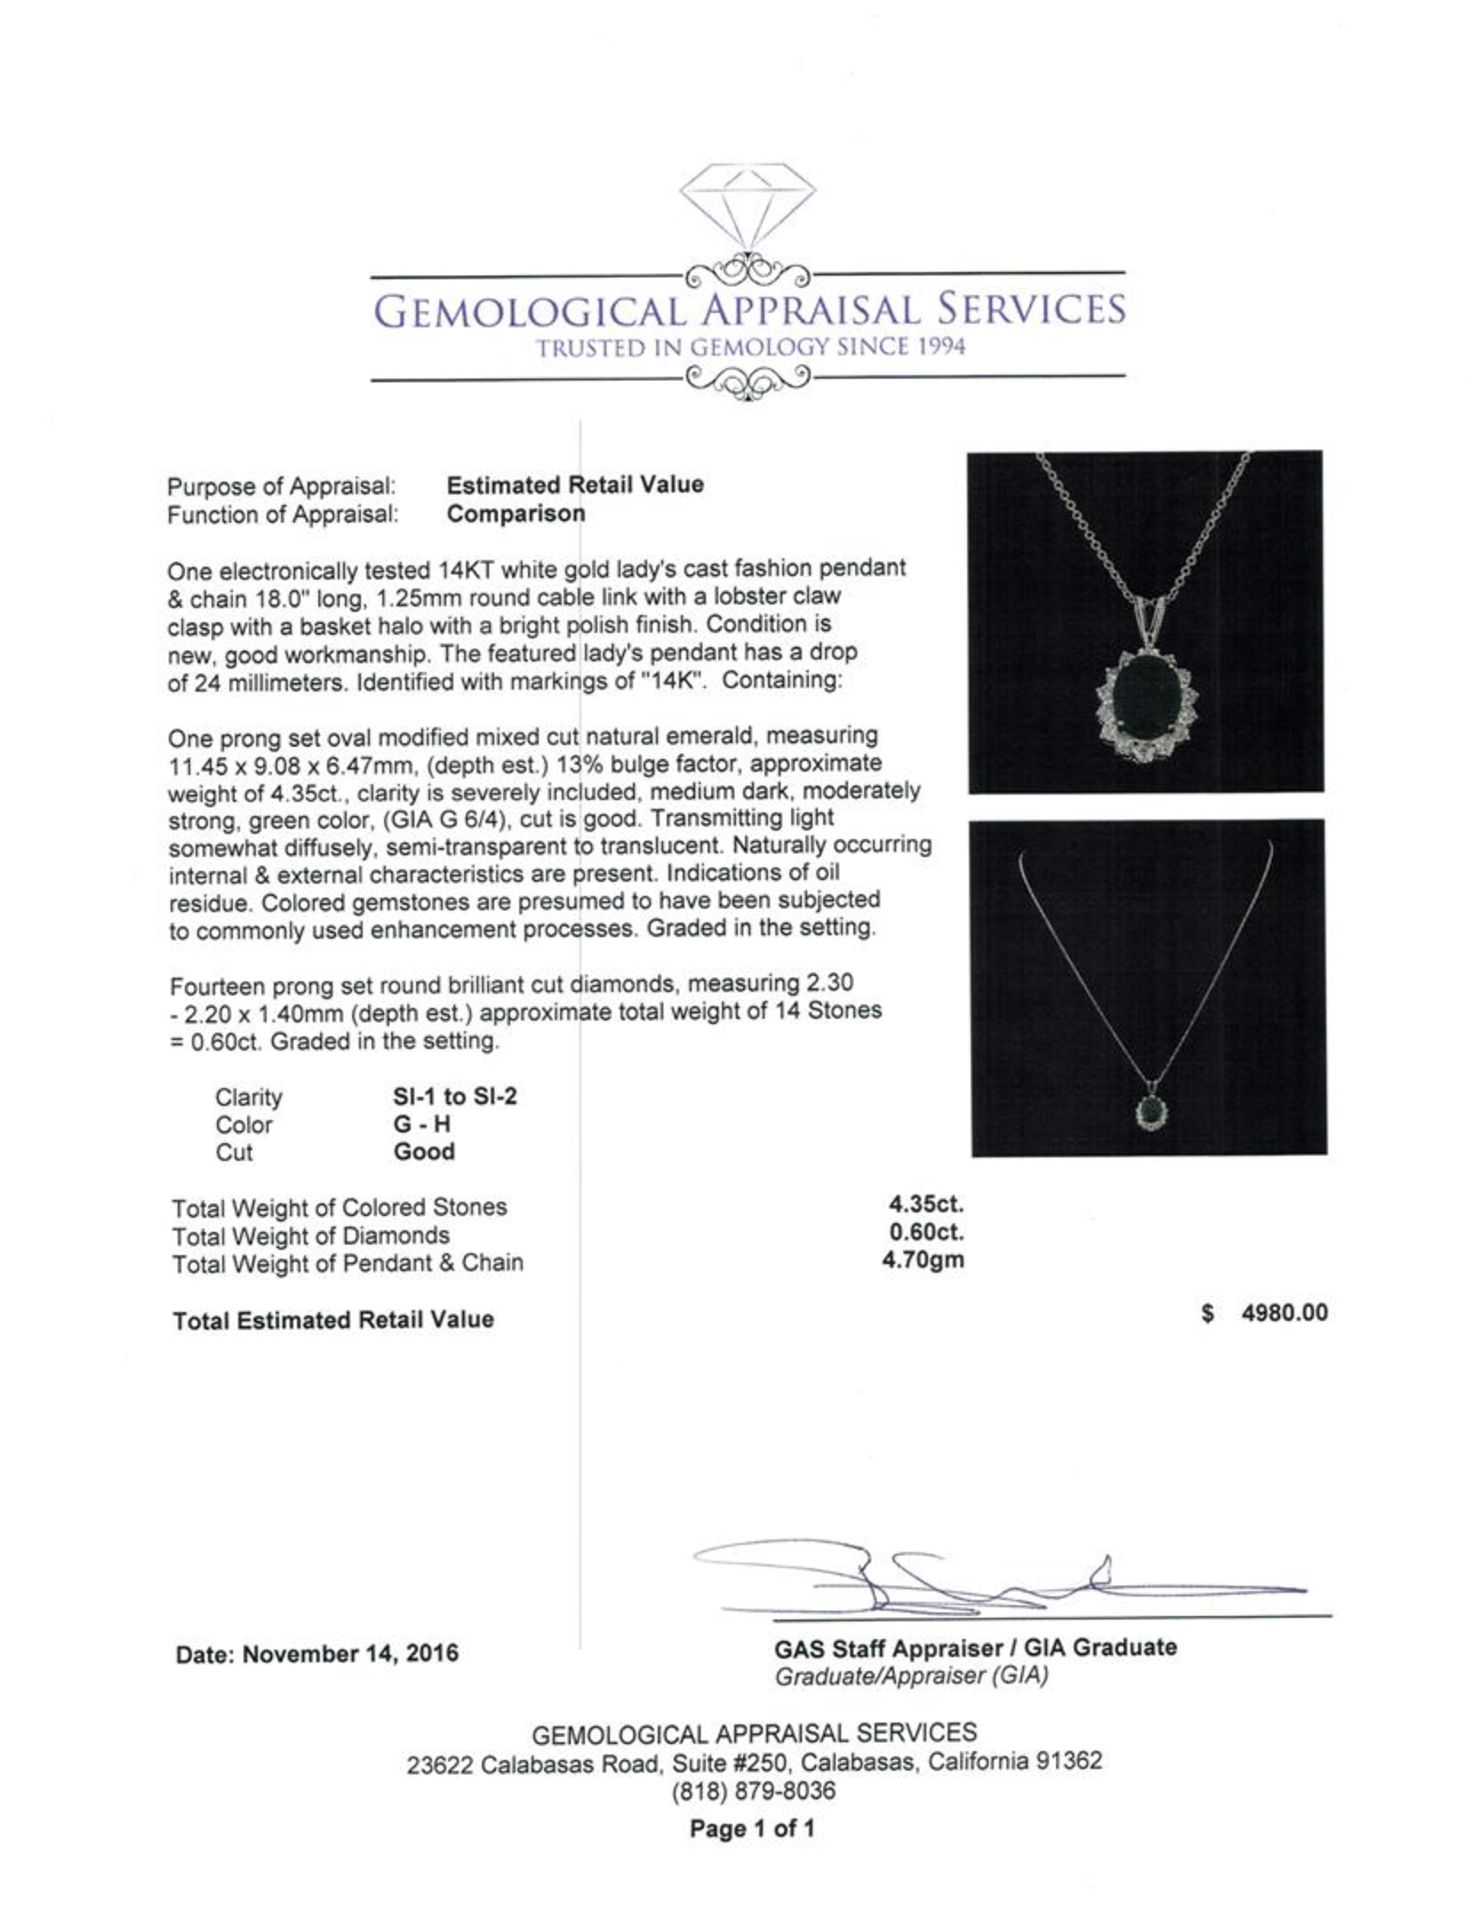 4.35 ctw Emerald and Diamond Pendant With Chain - 14KT White Gold - Image 3 of 3